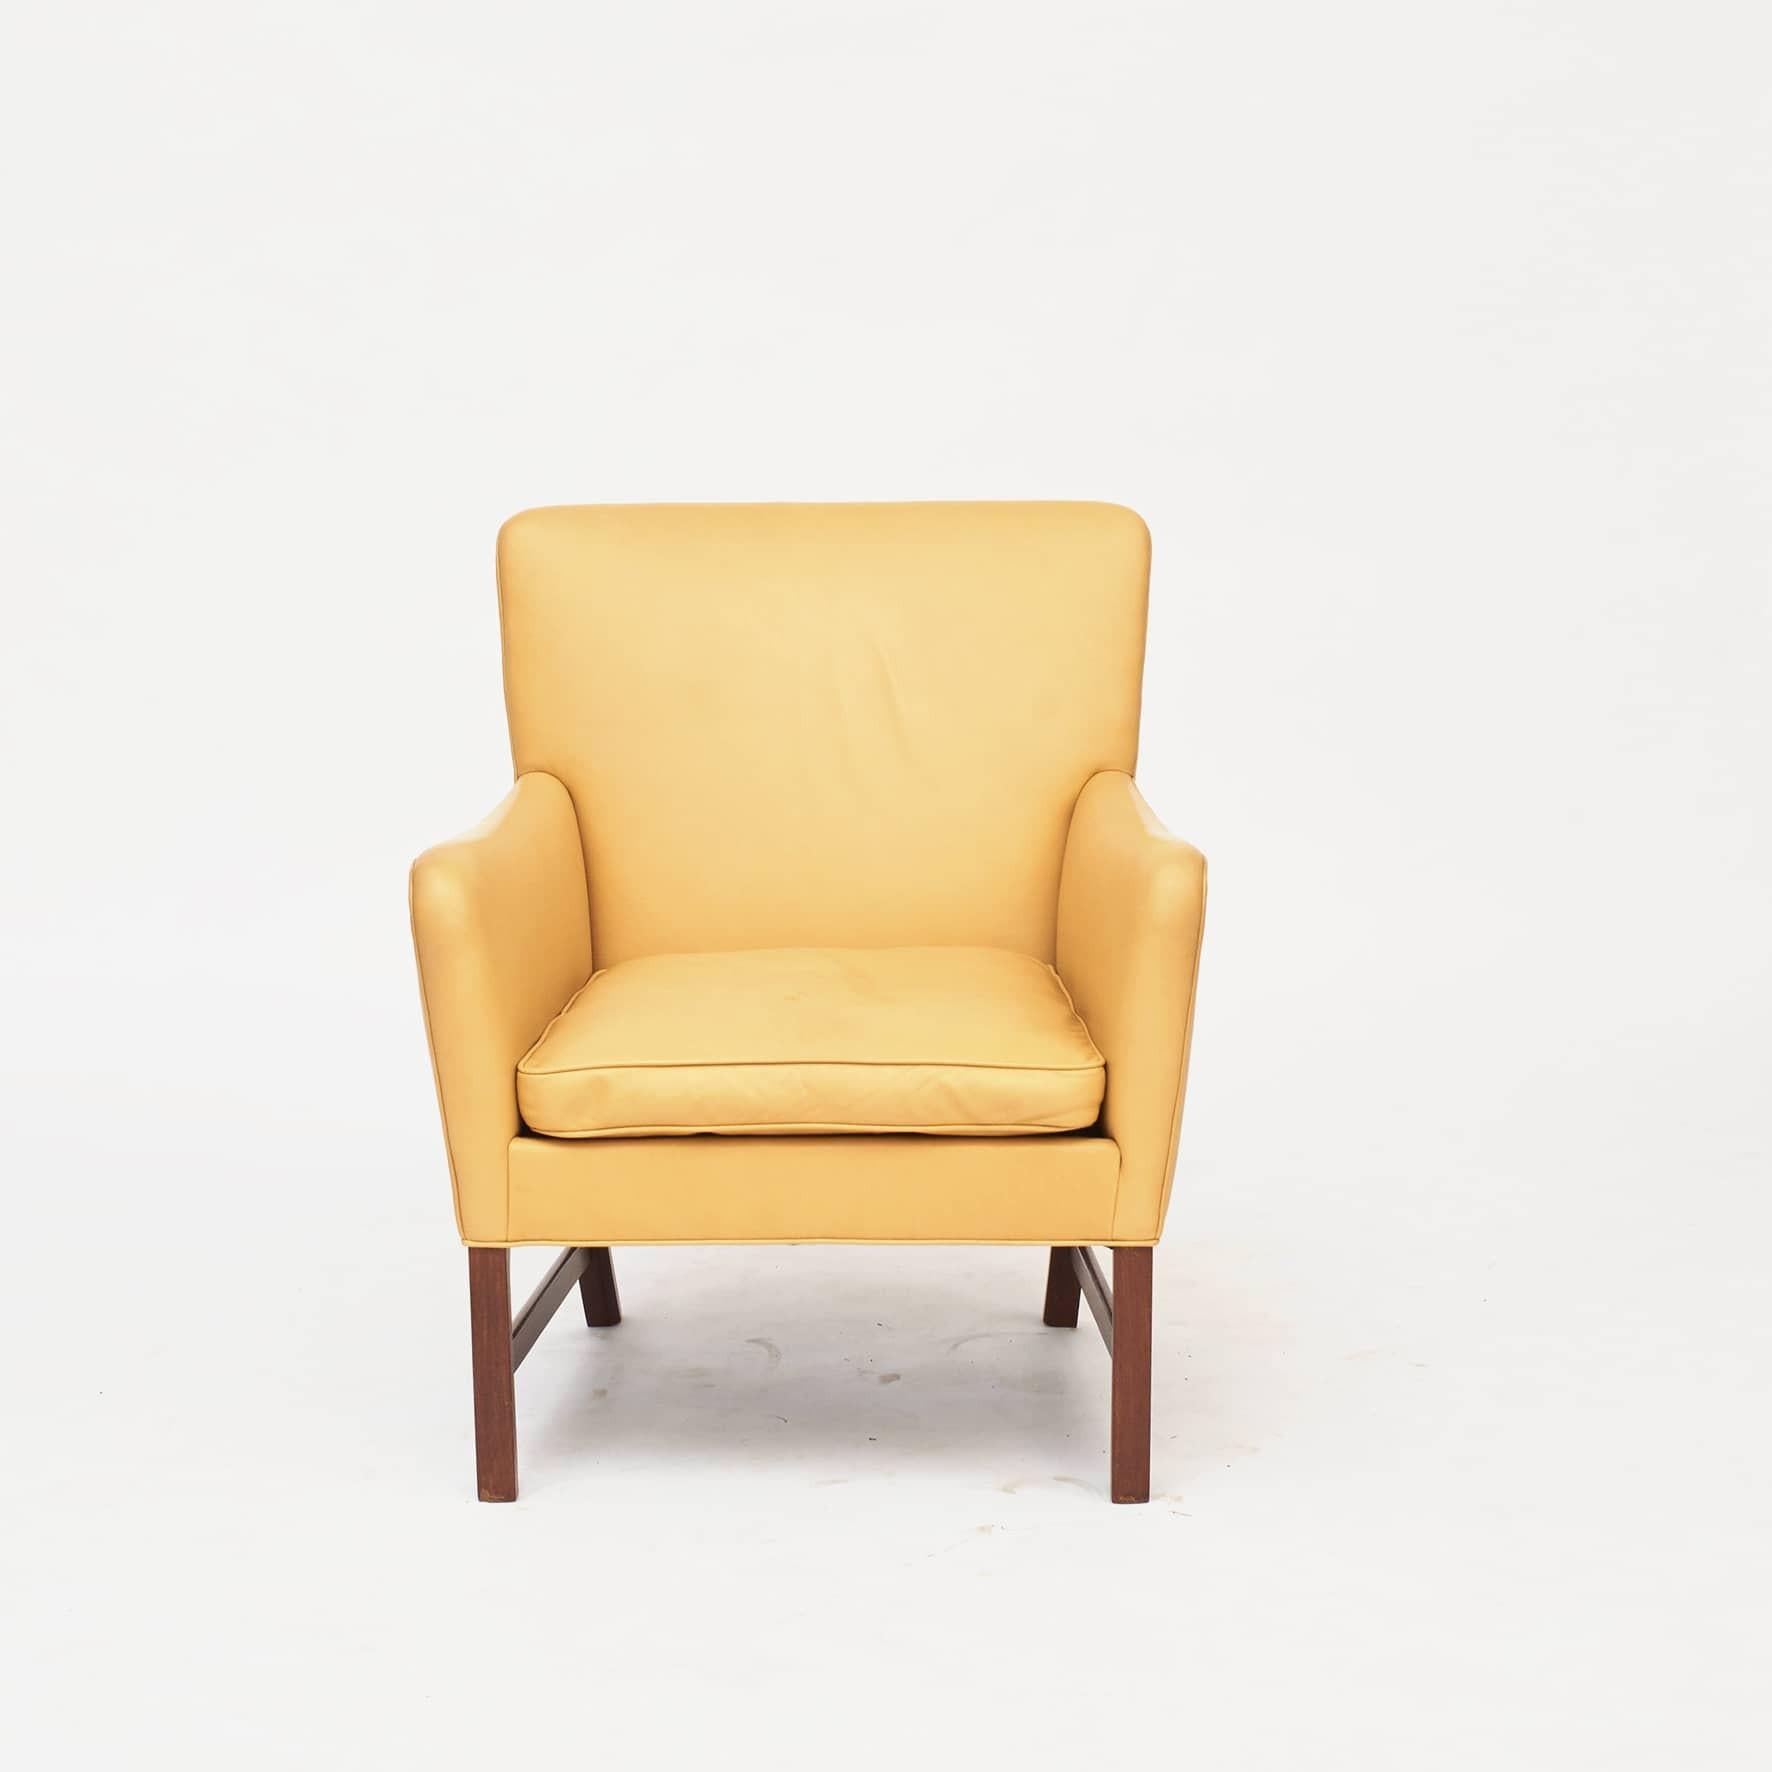 Ole Wanscher (1903-1985) lounge chair.
Base and frame in mahogany with stretcher bar supporting the legs. Later upholstered in sand leather, seat cushion with down filling.

Designed by Ole Wanscher in 1960 and executed by master Cabinetmaker A.